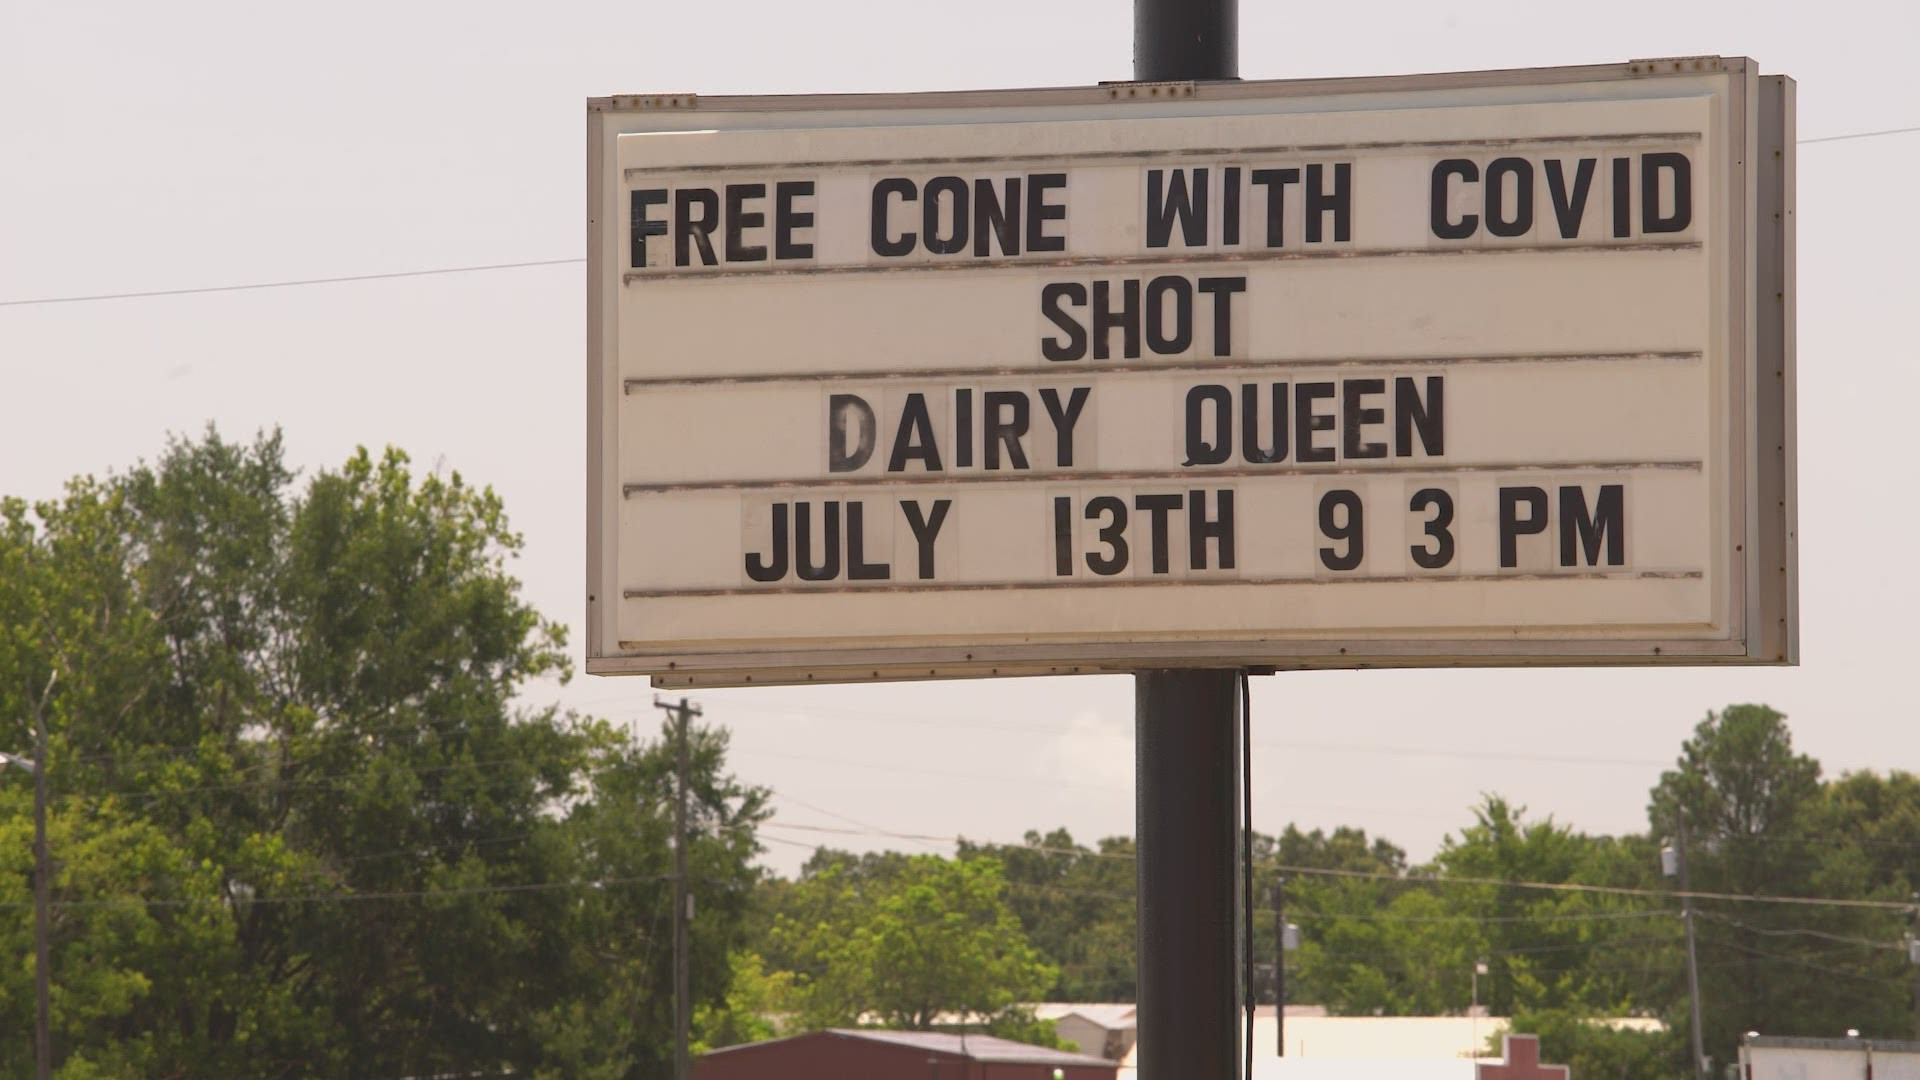 The Paris-Lamar County Health District set up shop at the Powderly, Texas Dairy Queen.